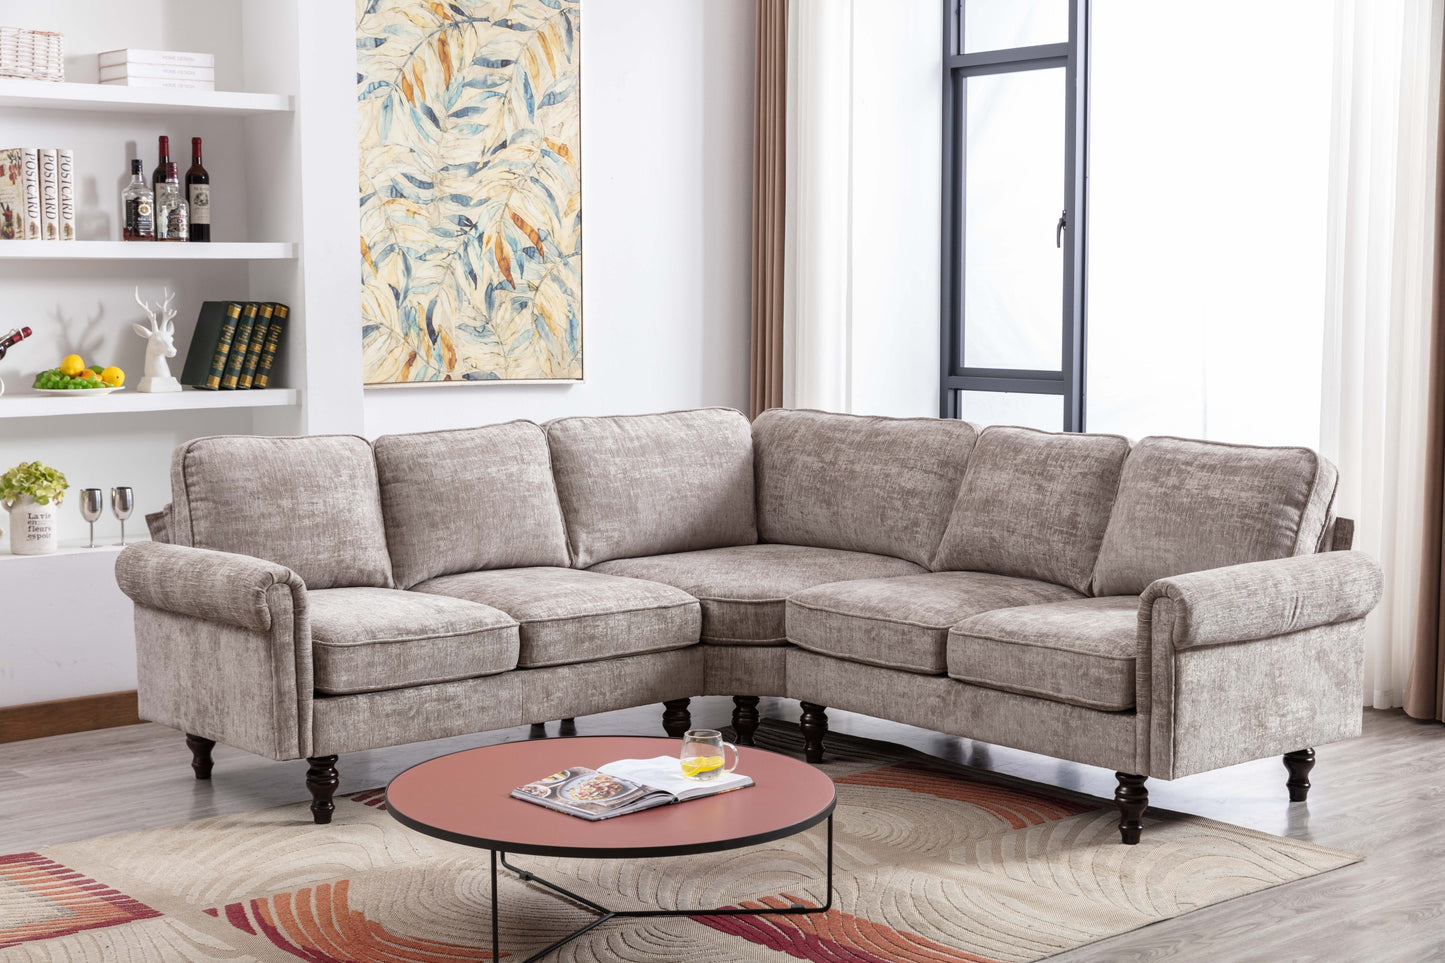 COOLMORE Accent sofa /Living room sofa sectional  sofa